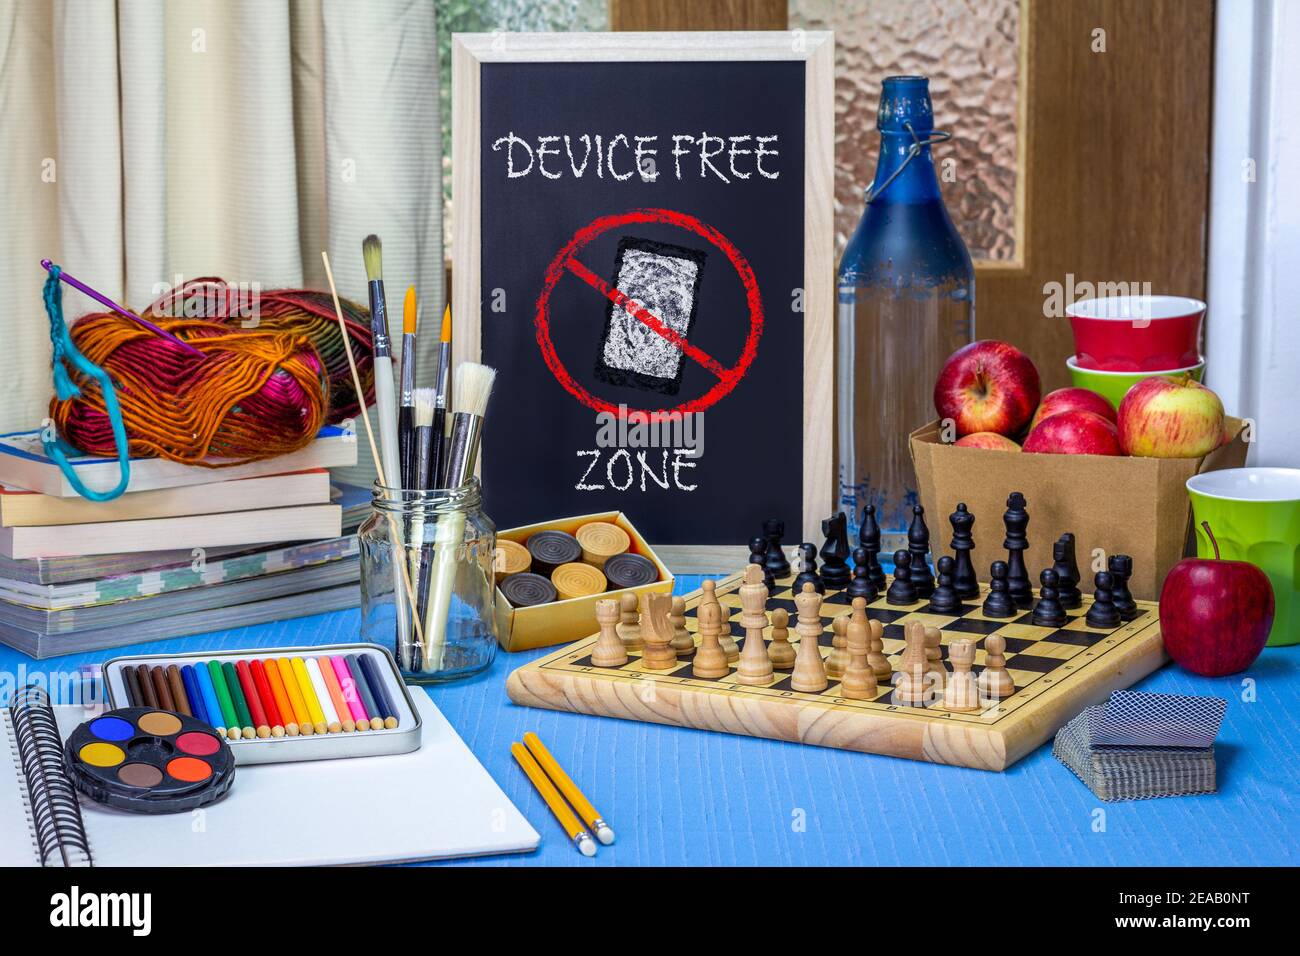 Device Free Zone chalk board on table with games, art materials, books and chess board. Encouraging digital down time to reconnect with people. Stock Photo